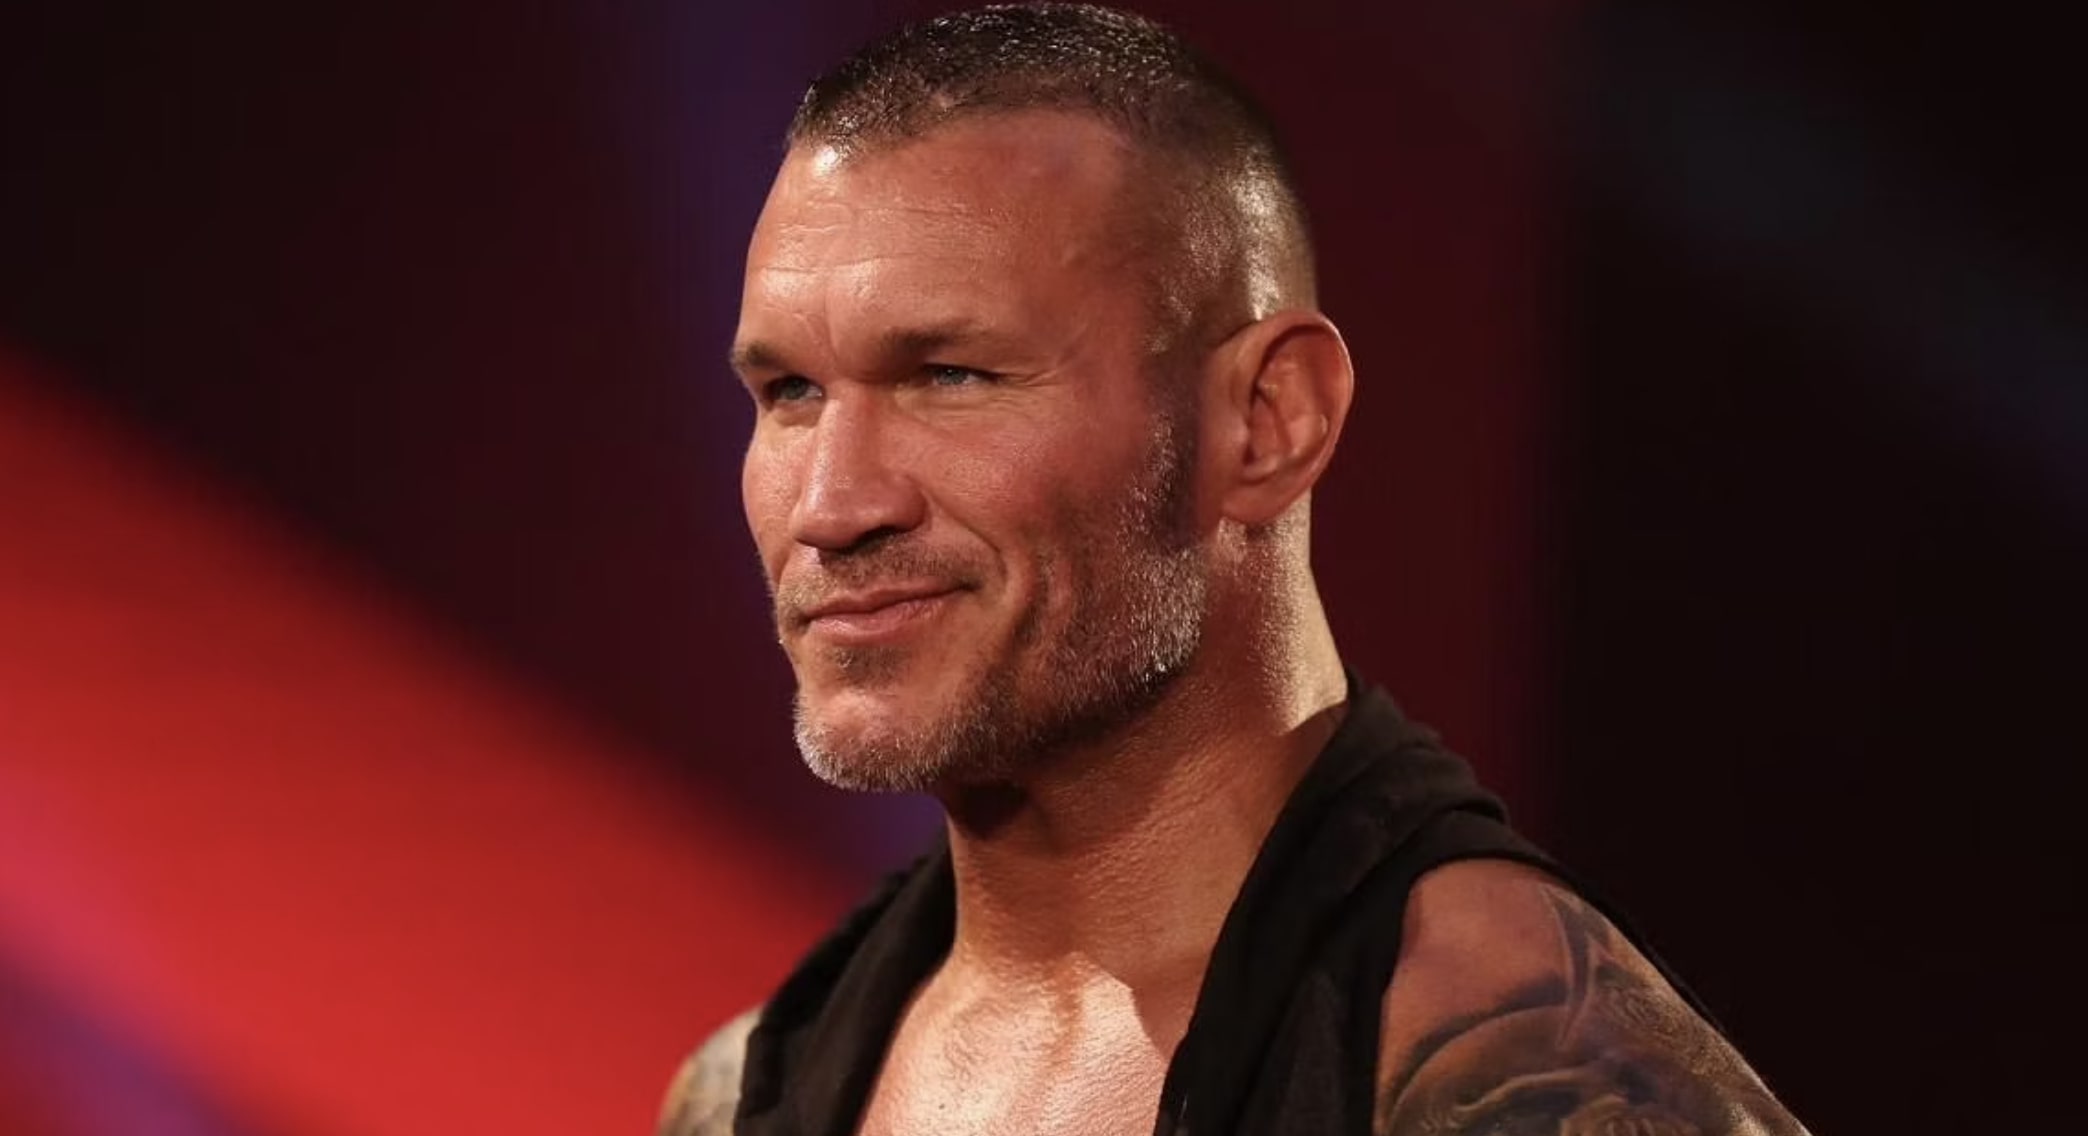 Randy Orton Says Top WWE Superstar's "T*ts Look Real Great Right Now"